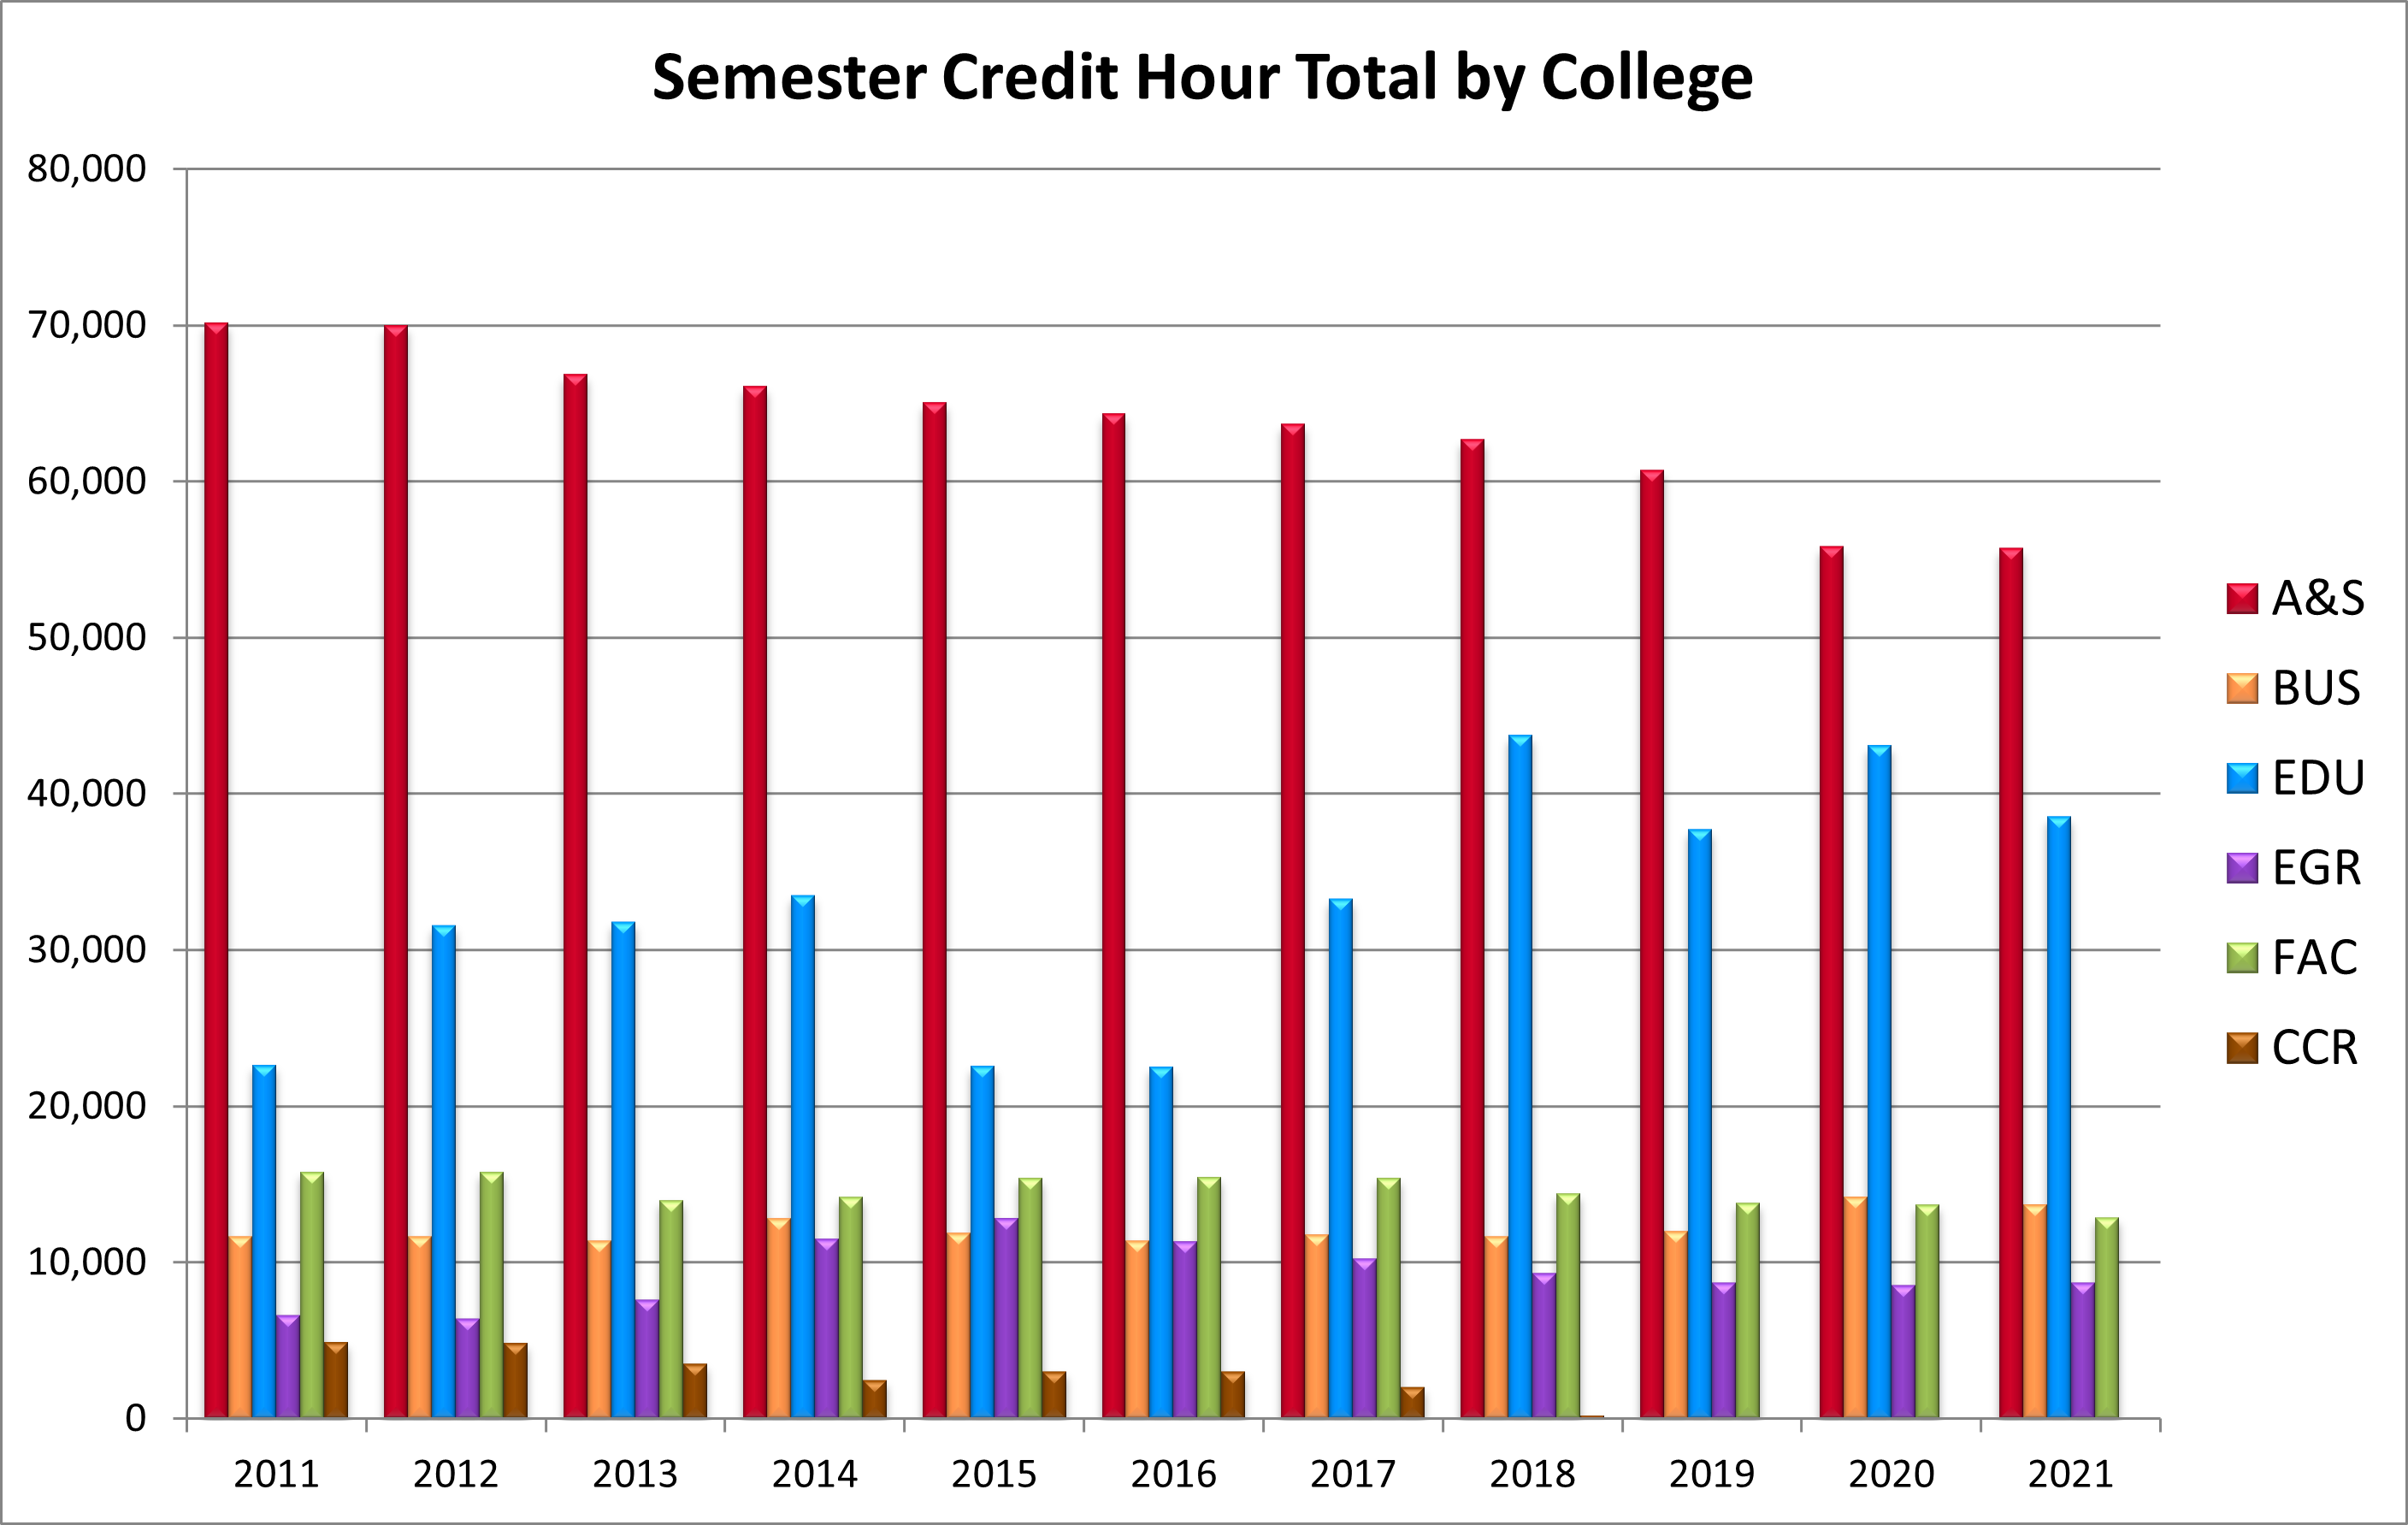 Total Semester Credit Hour by College